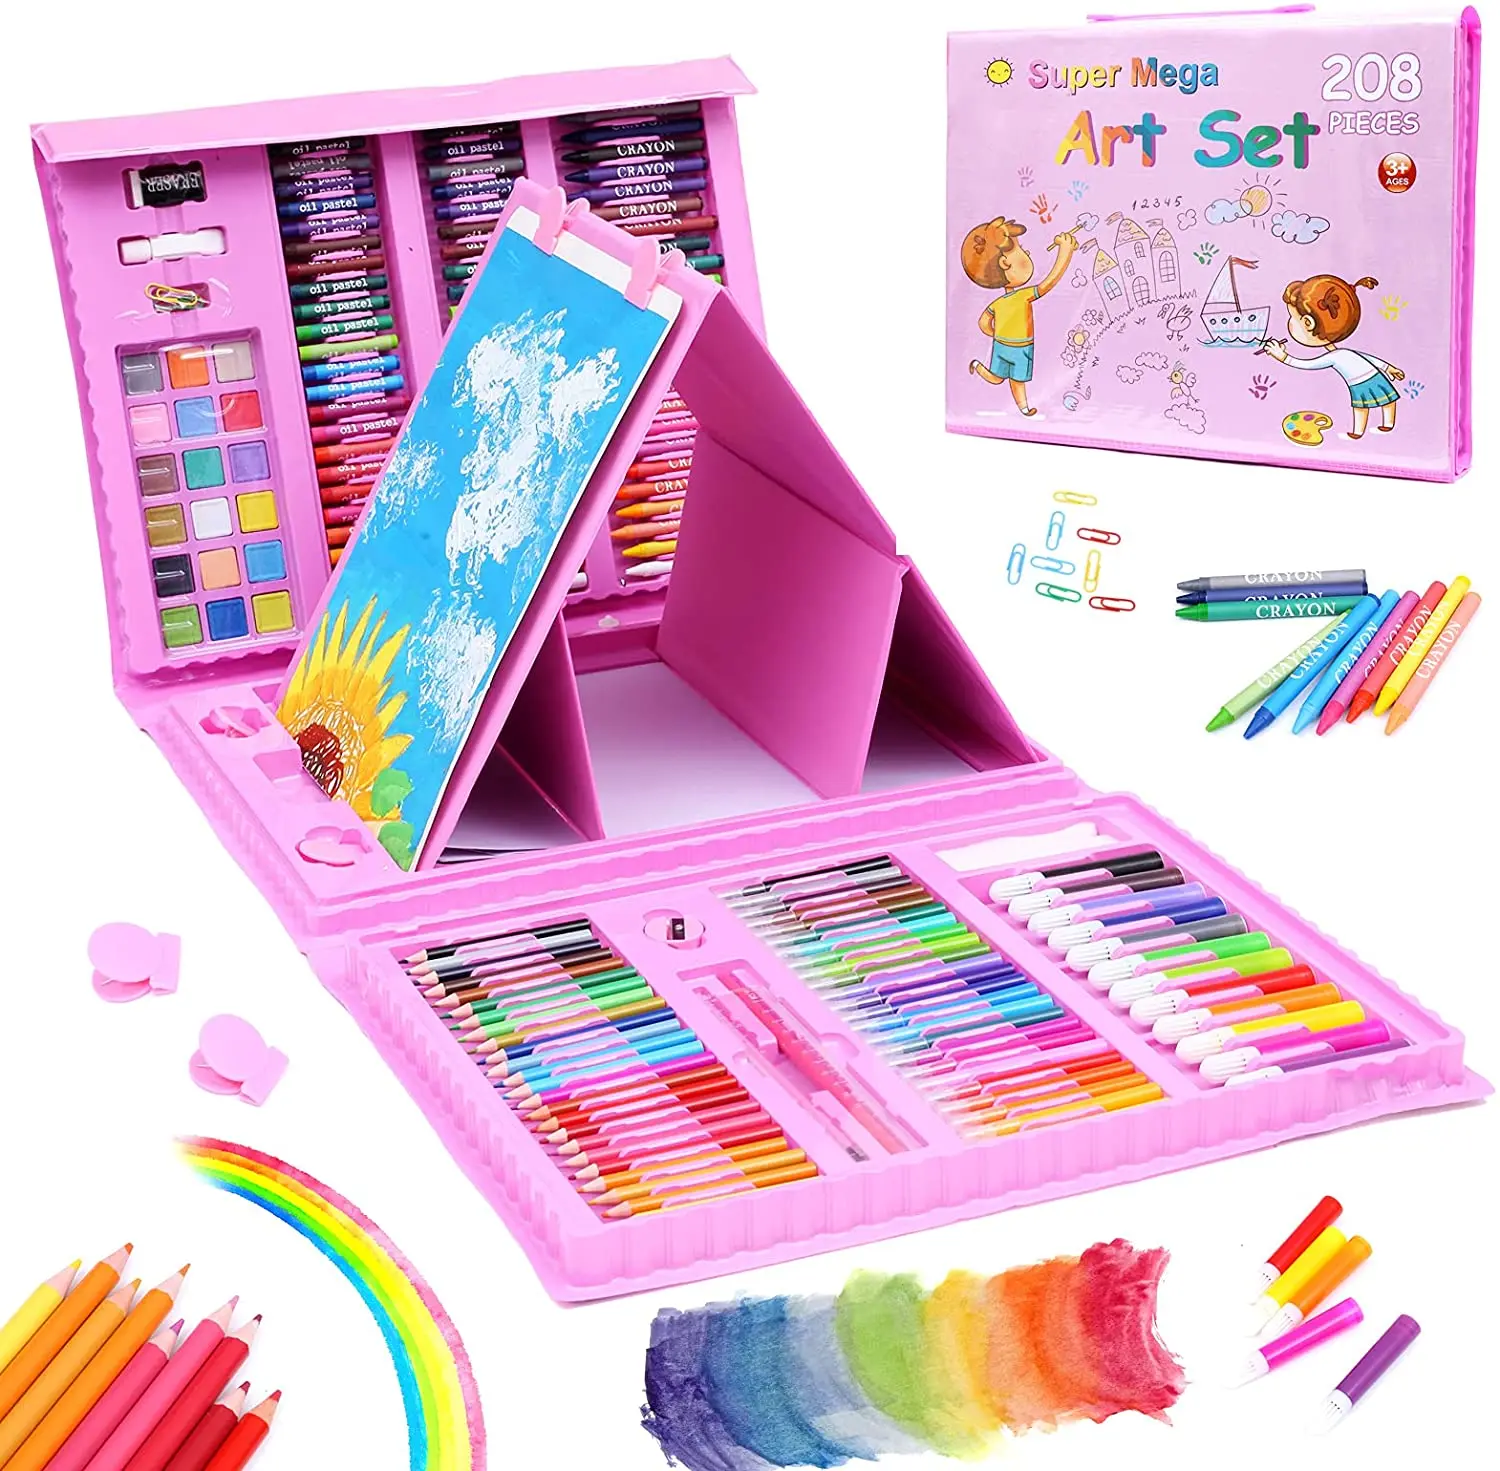 Aggregate more than 148 children’s sketching set latest